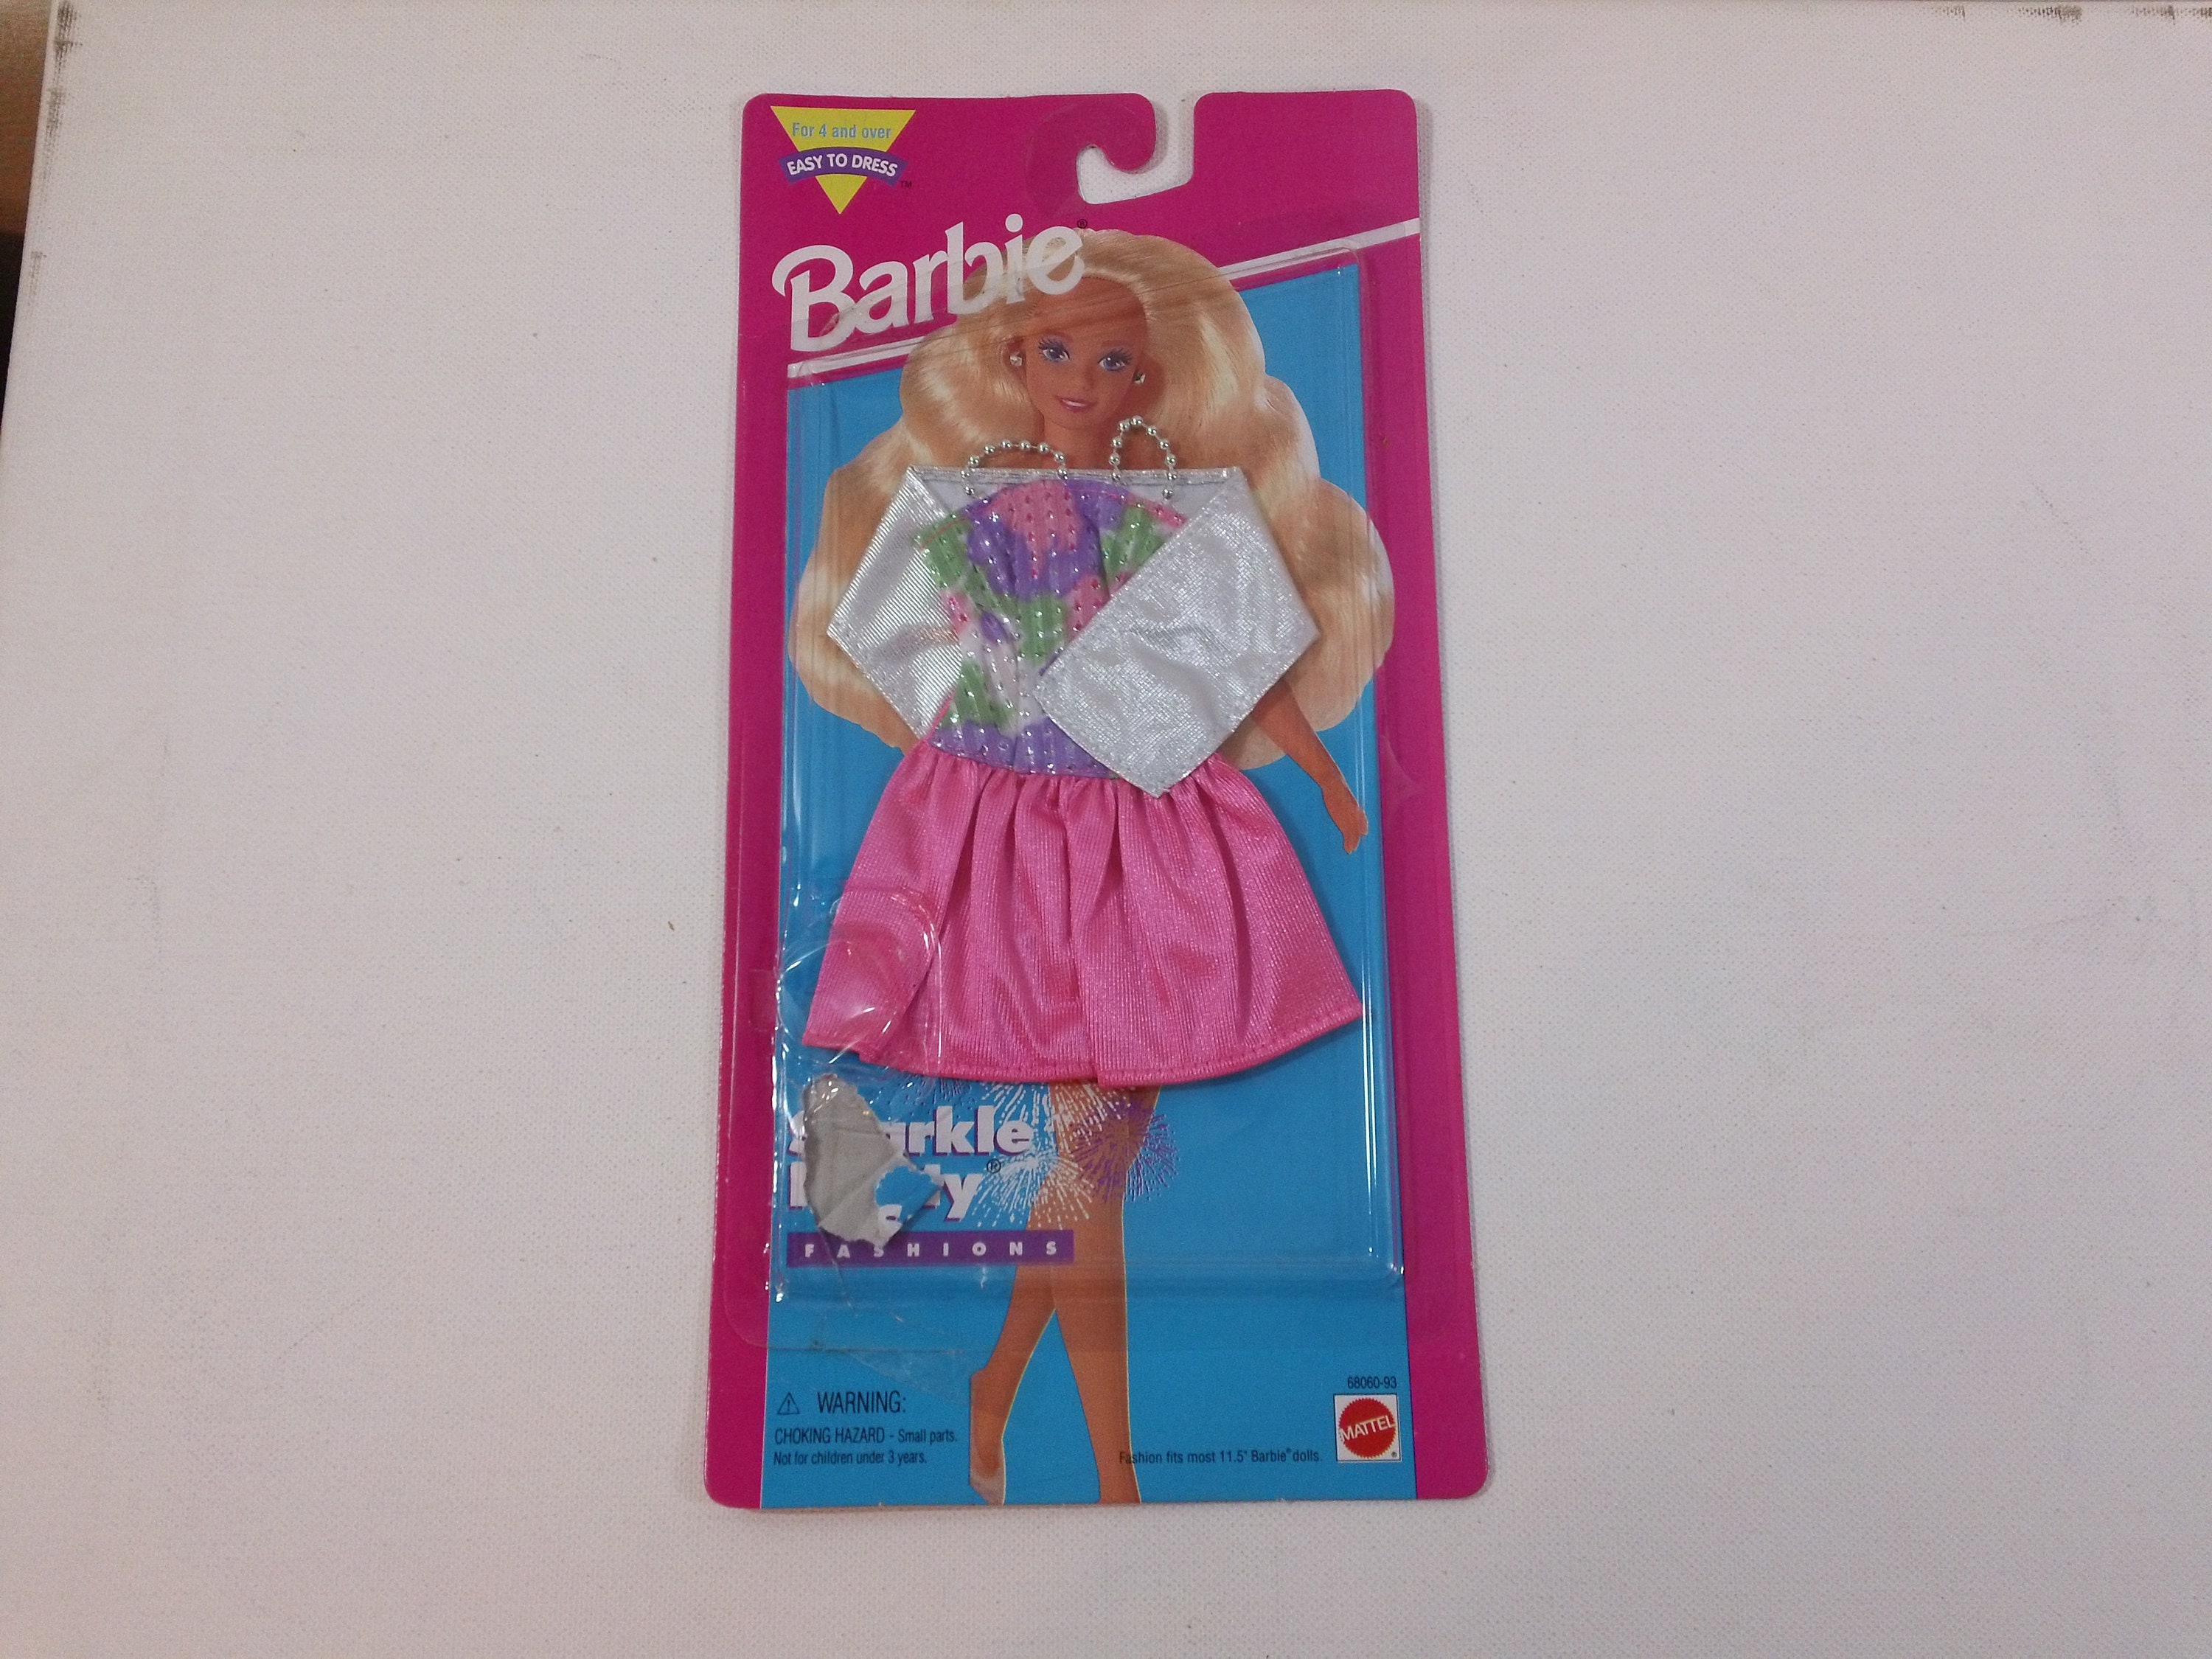 Online Sales Cheap Of Experts Lot Of 6 Genuine Mattel Barbie Doll Dolls Fashion Clothing Clothes